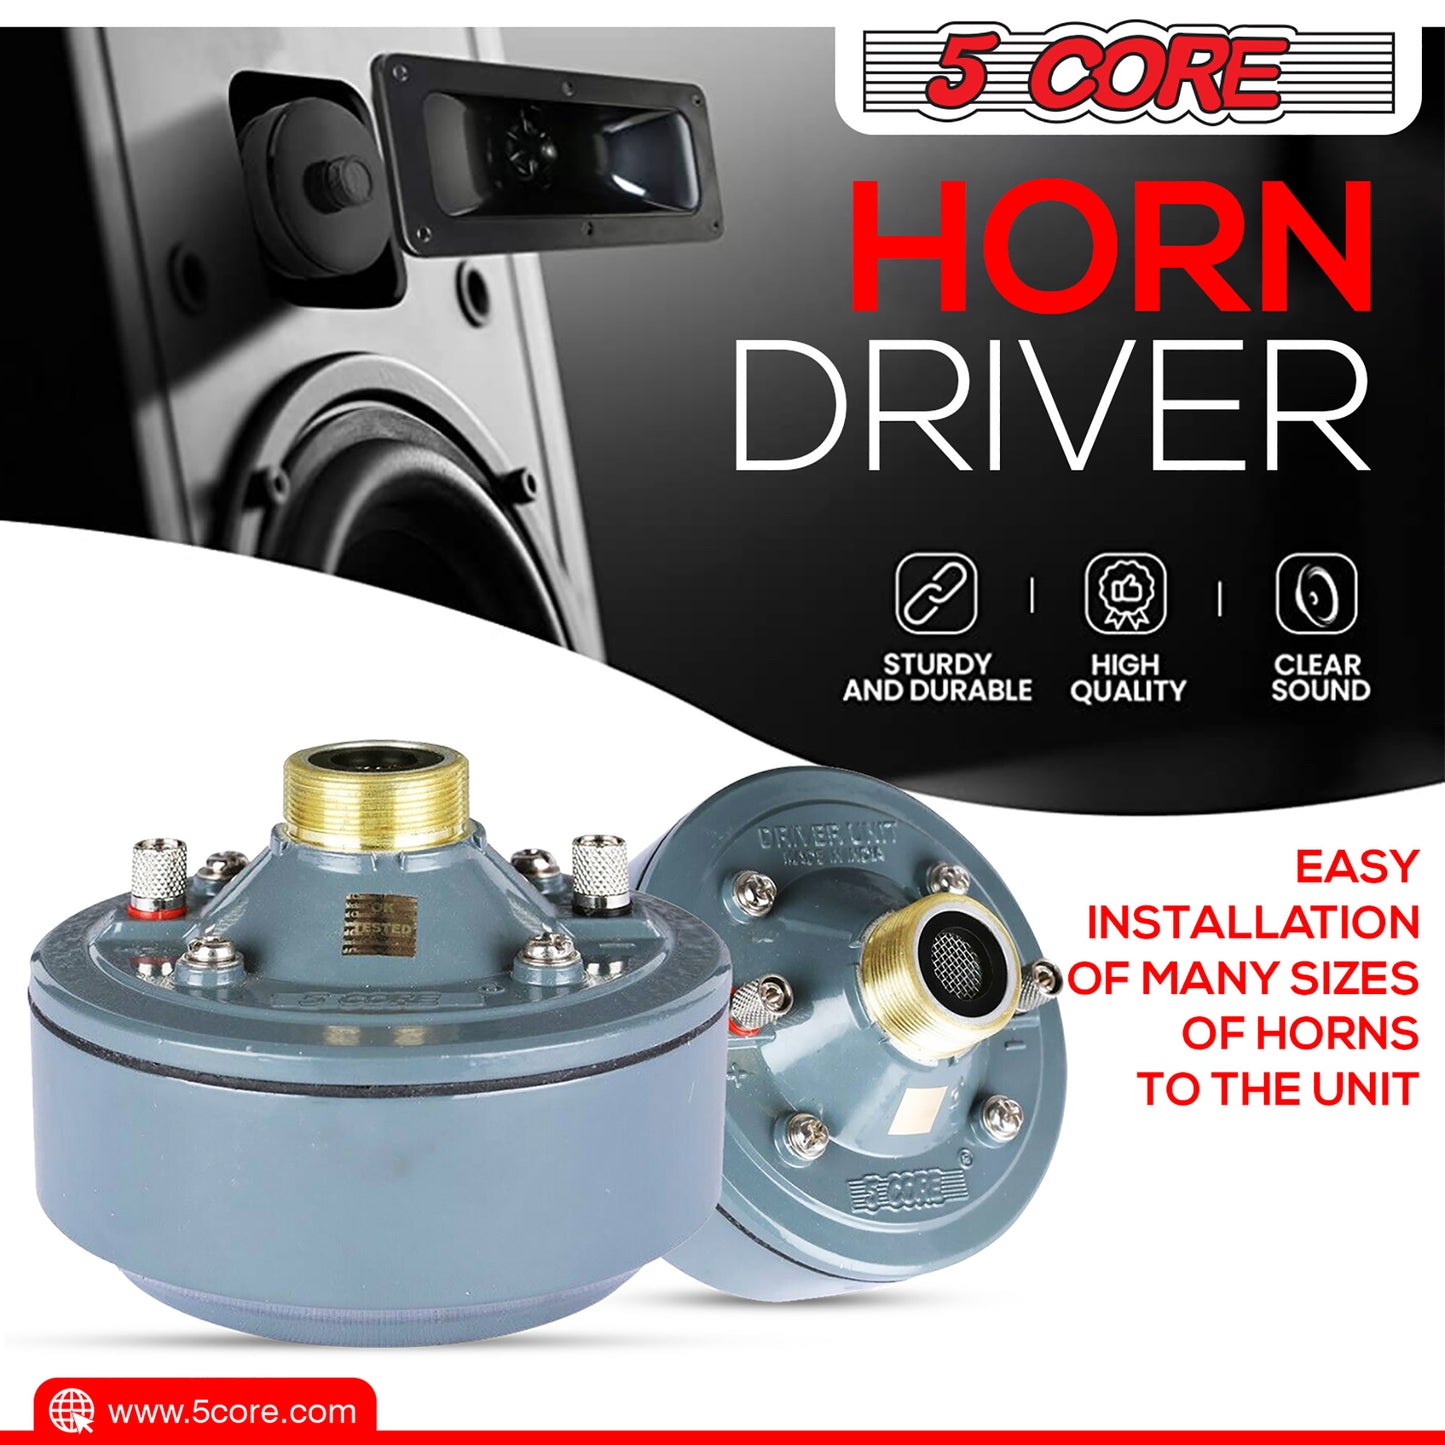 Compression Horn Tweeter Driver Unit Screw-On Speaker 8 ohms High Frequency 5 Core DU 60WRatings Online